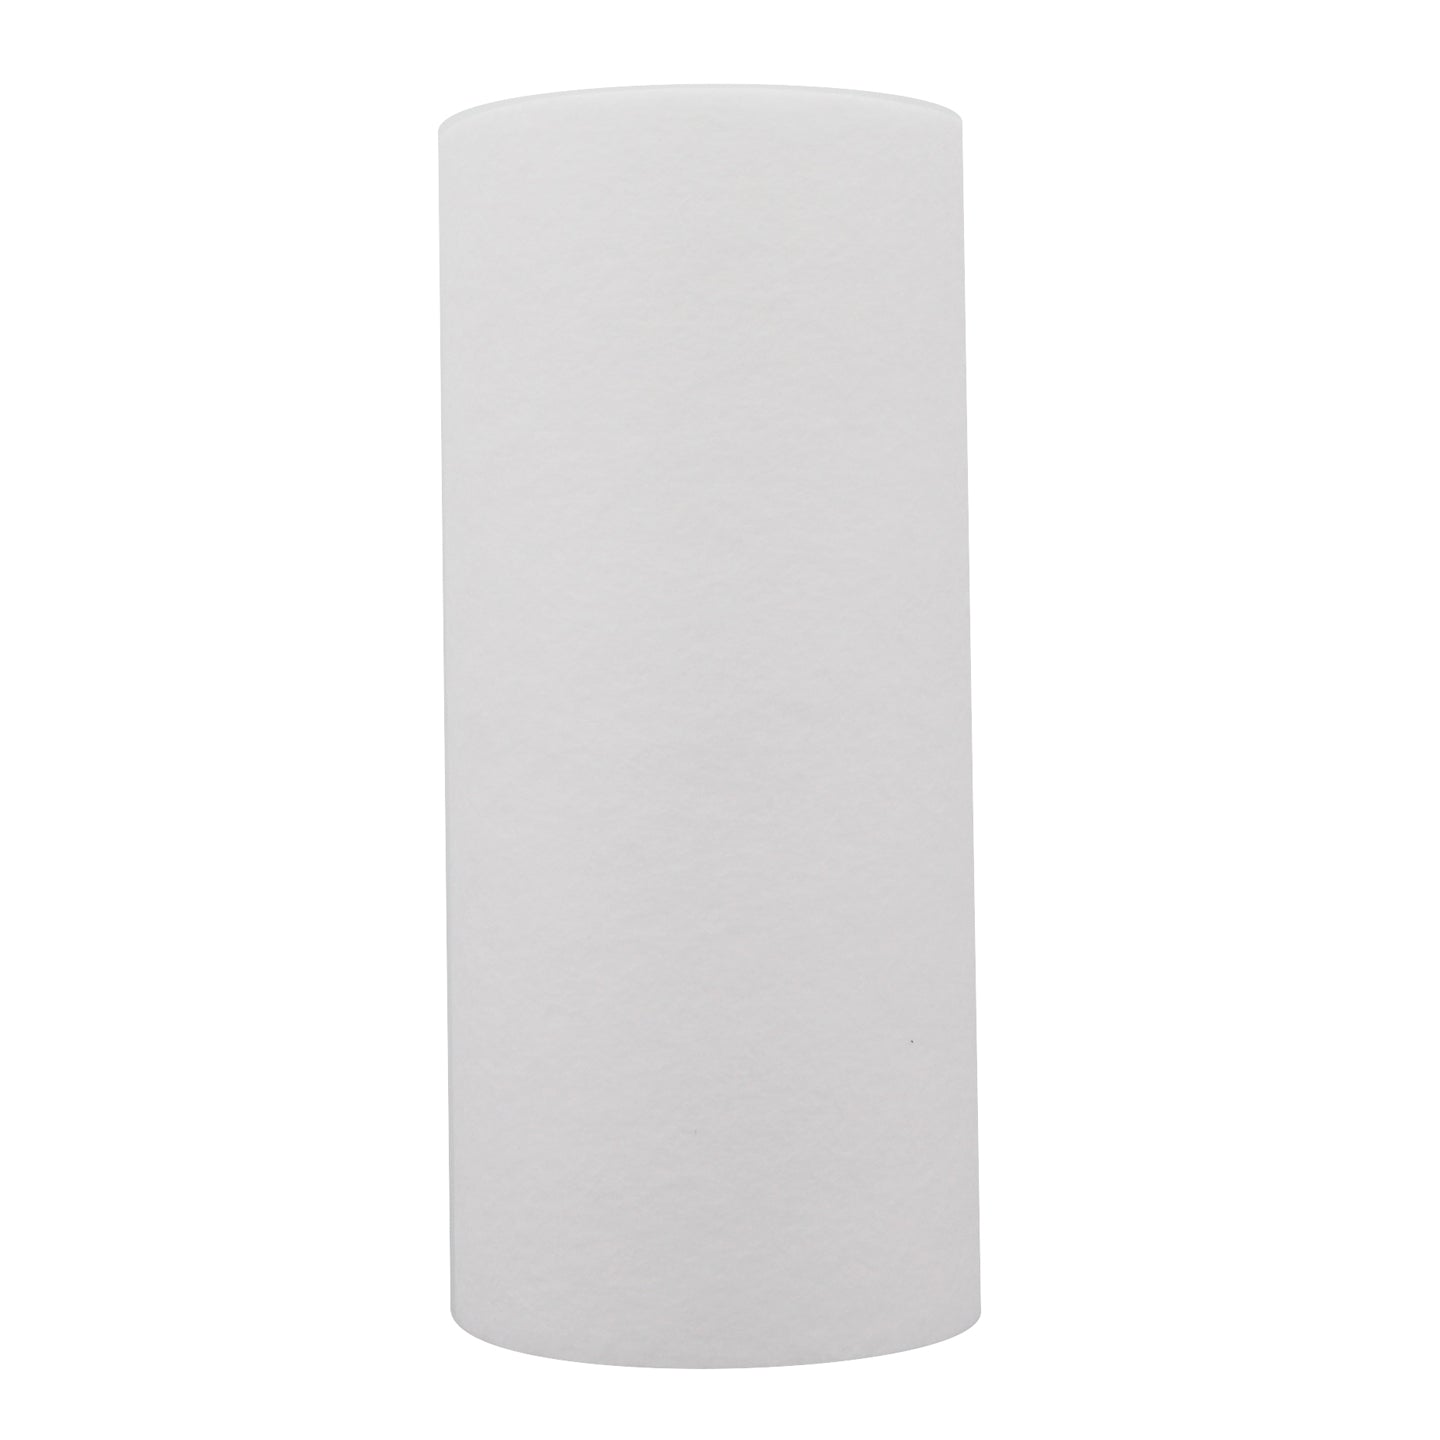 Tier1 10 inch x 4.5 inch Sediment Water Filter (20 Micron)